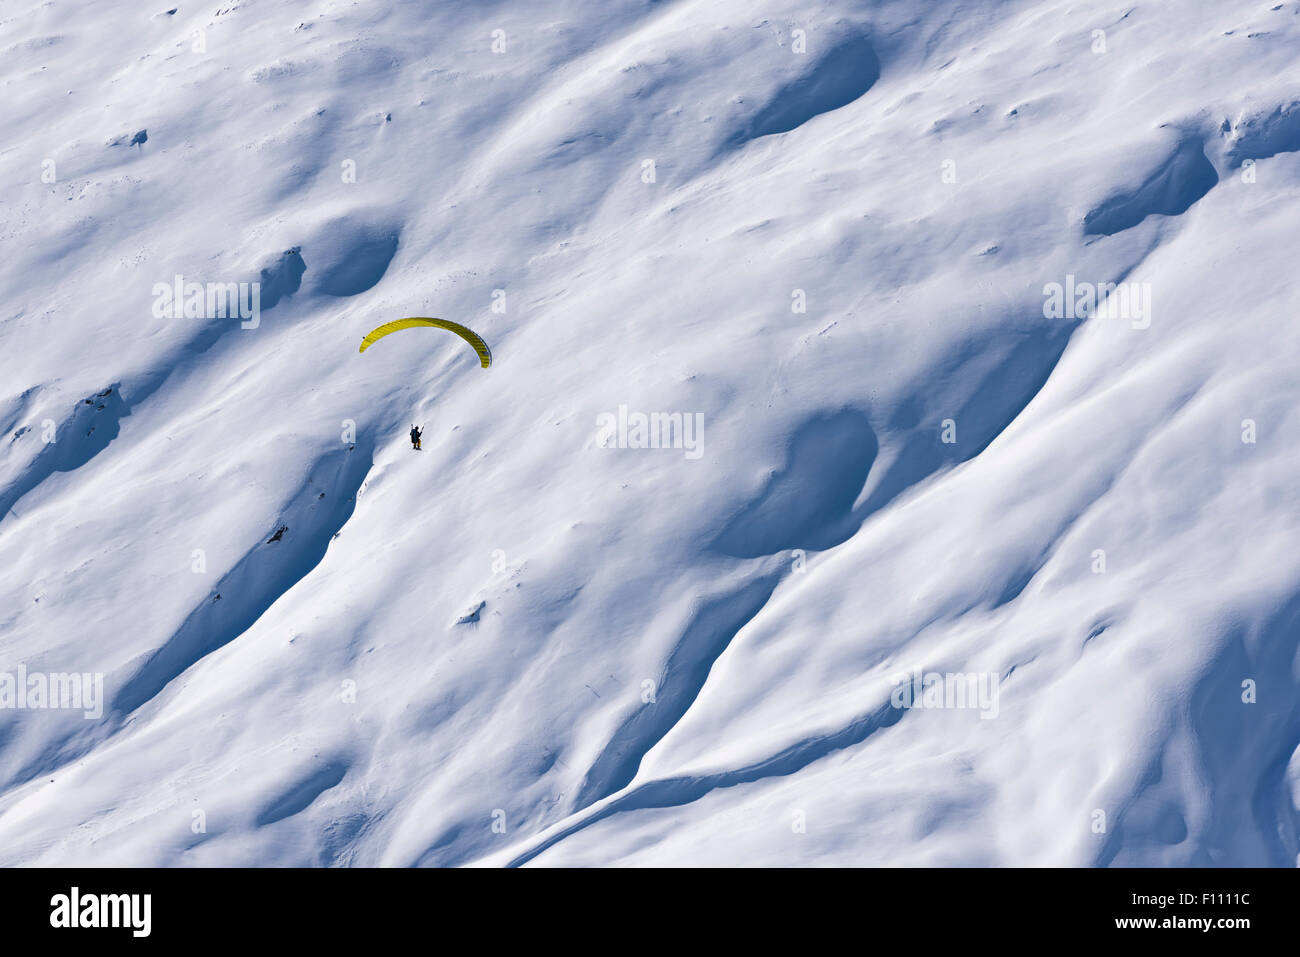 A paraglider is flying high up in the snow covered mountains above a snowfield at Belalp/Blatten, Switzerland (Valais canton). Stock Photo